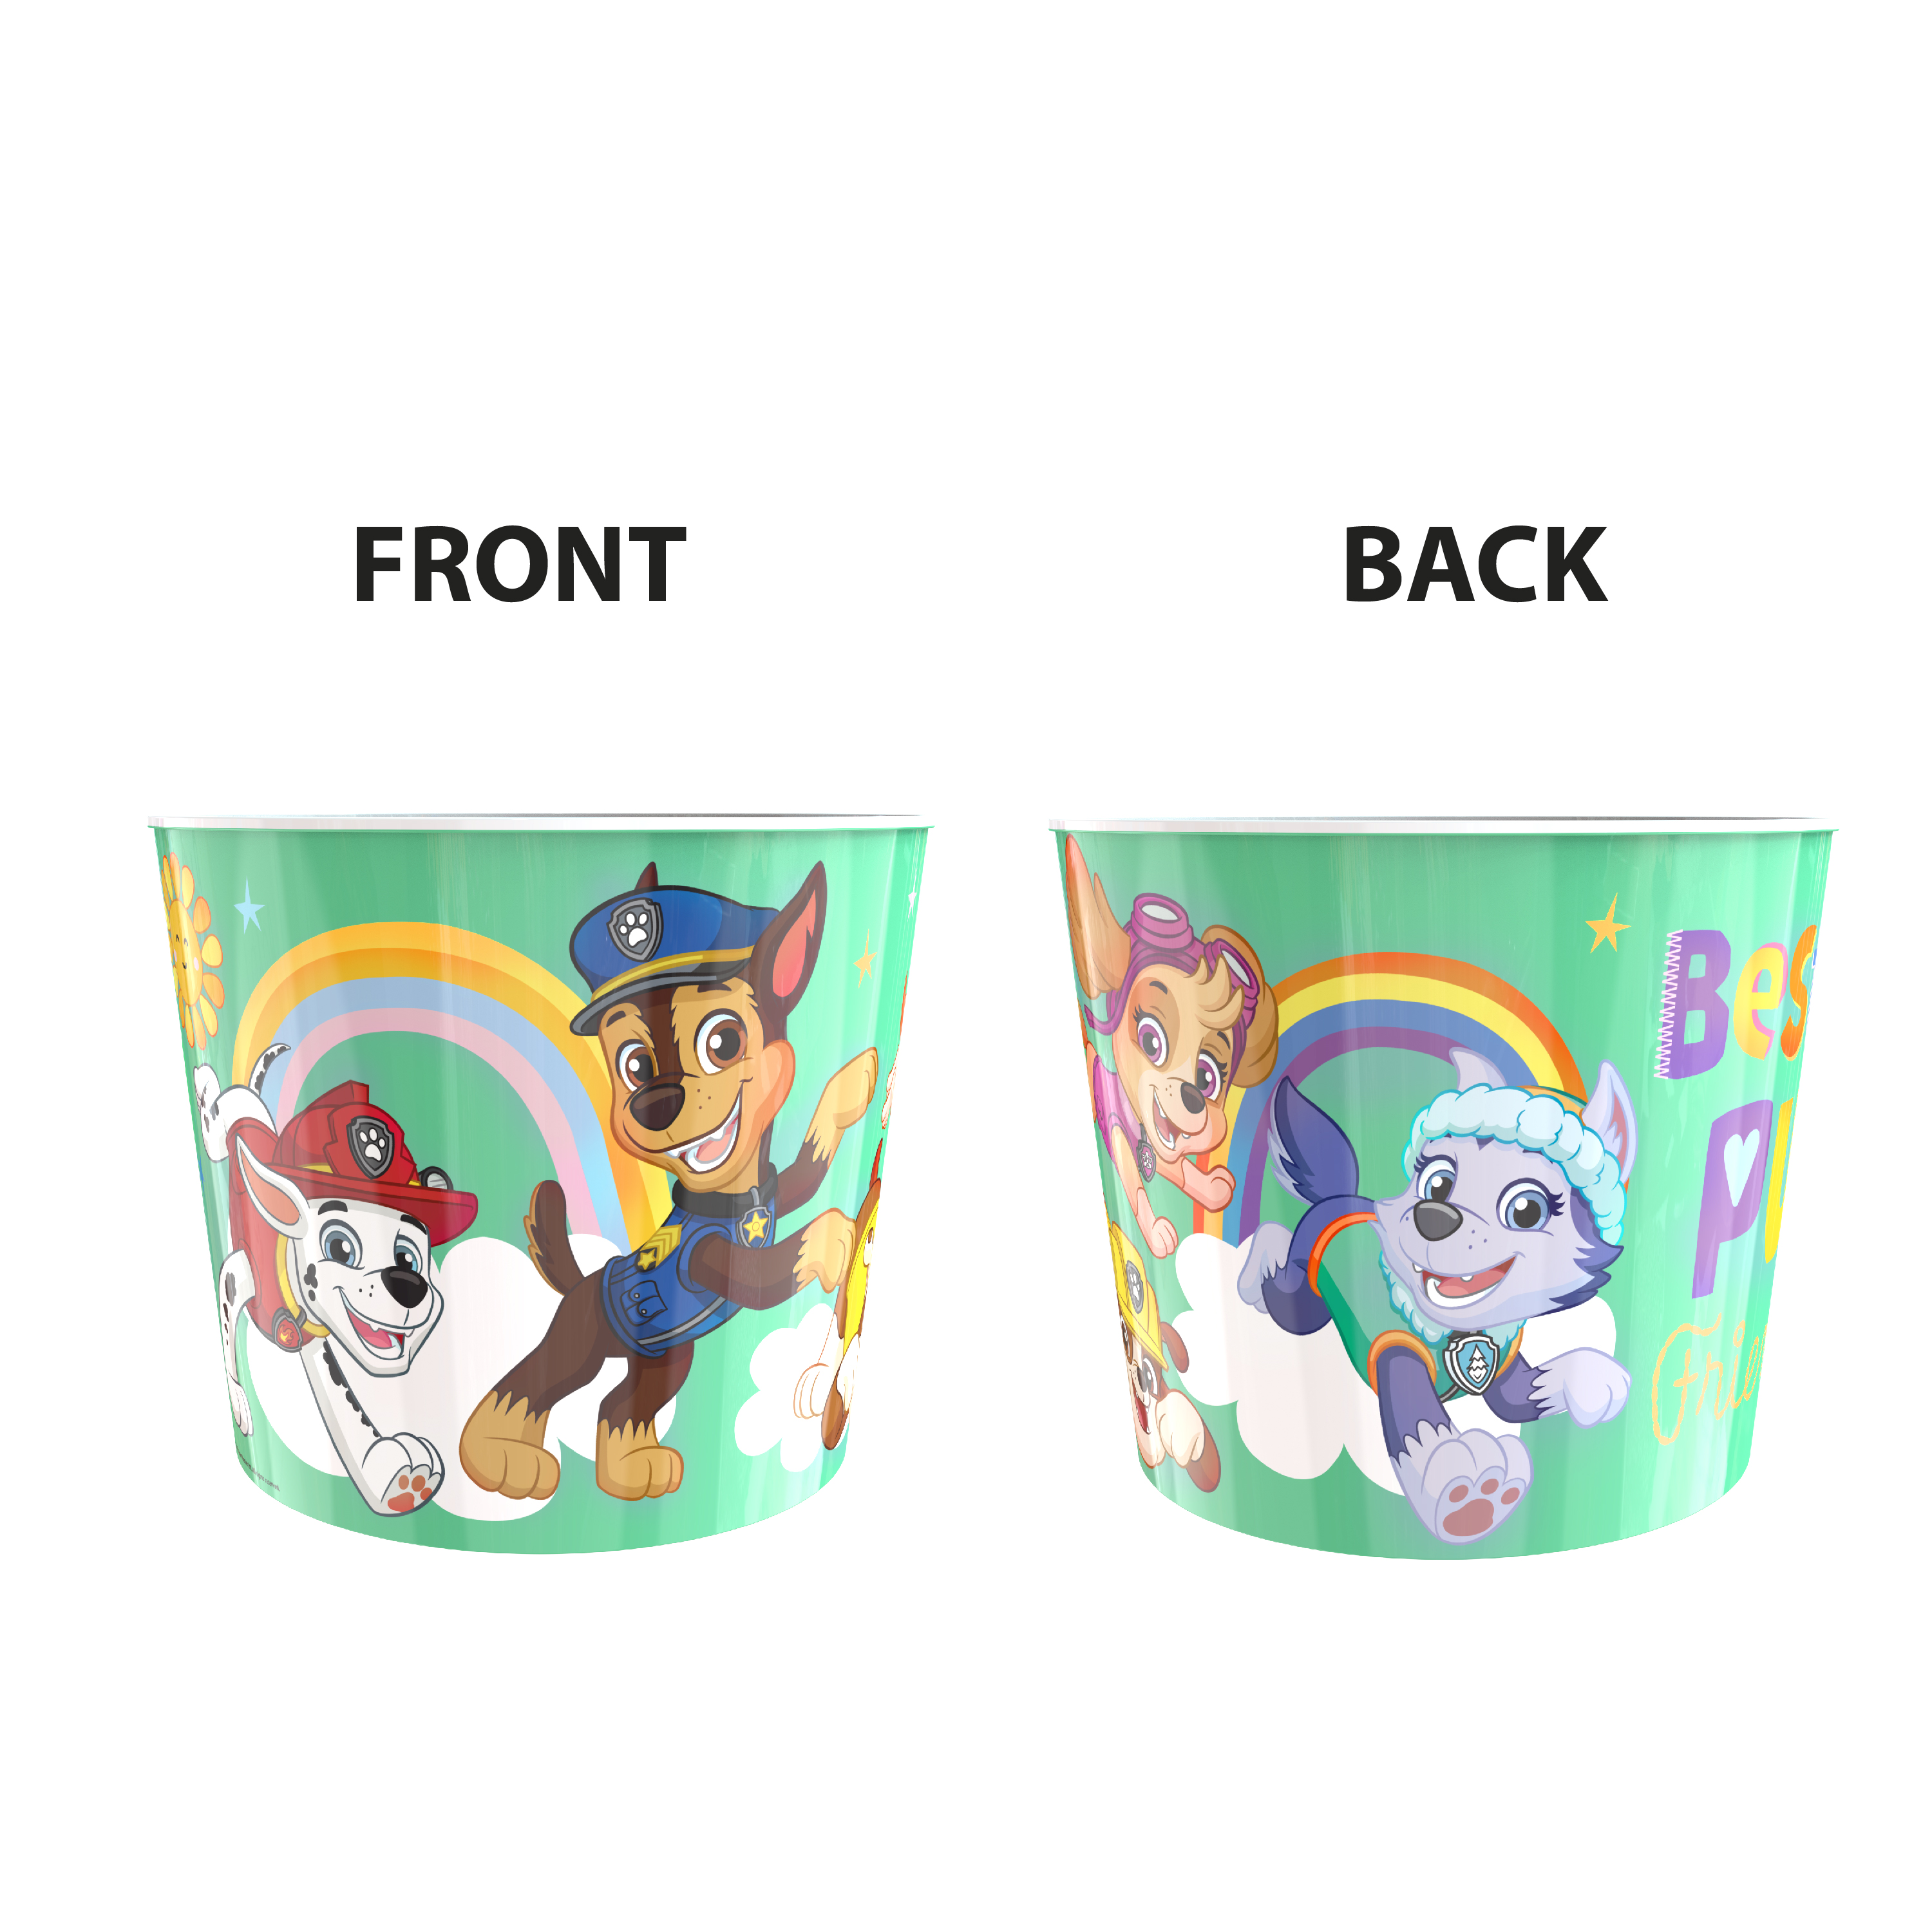 Paw Patrol Plastic Popcorn Container and Bowls, Chase, Marshall and Friends, 5-piece set slideshow image 11